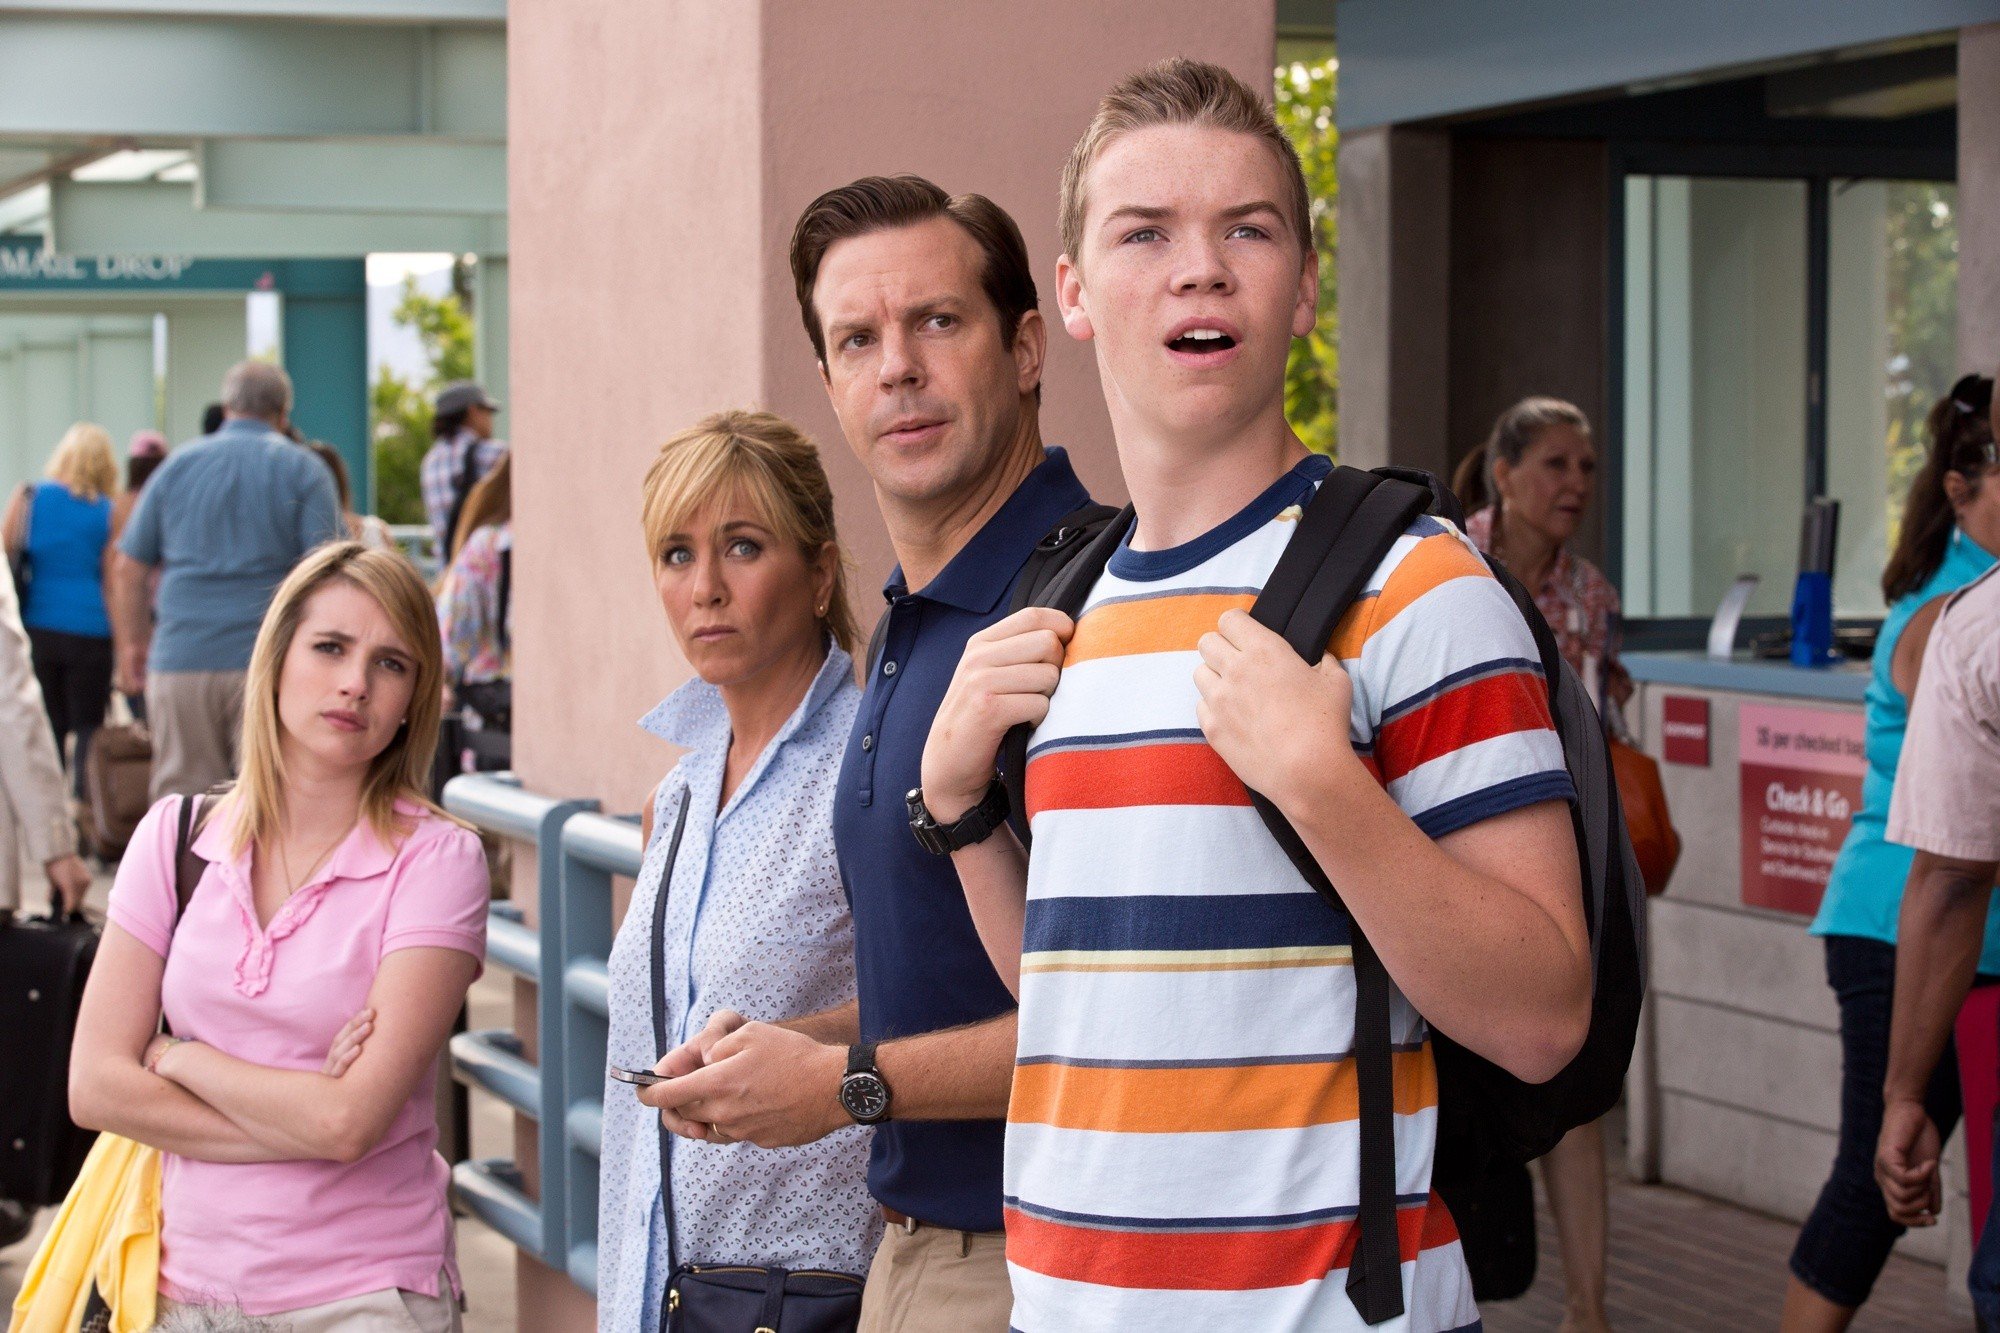 Will Poulter in We're the Millers